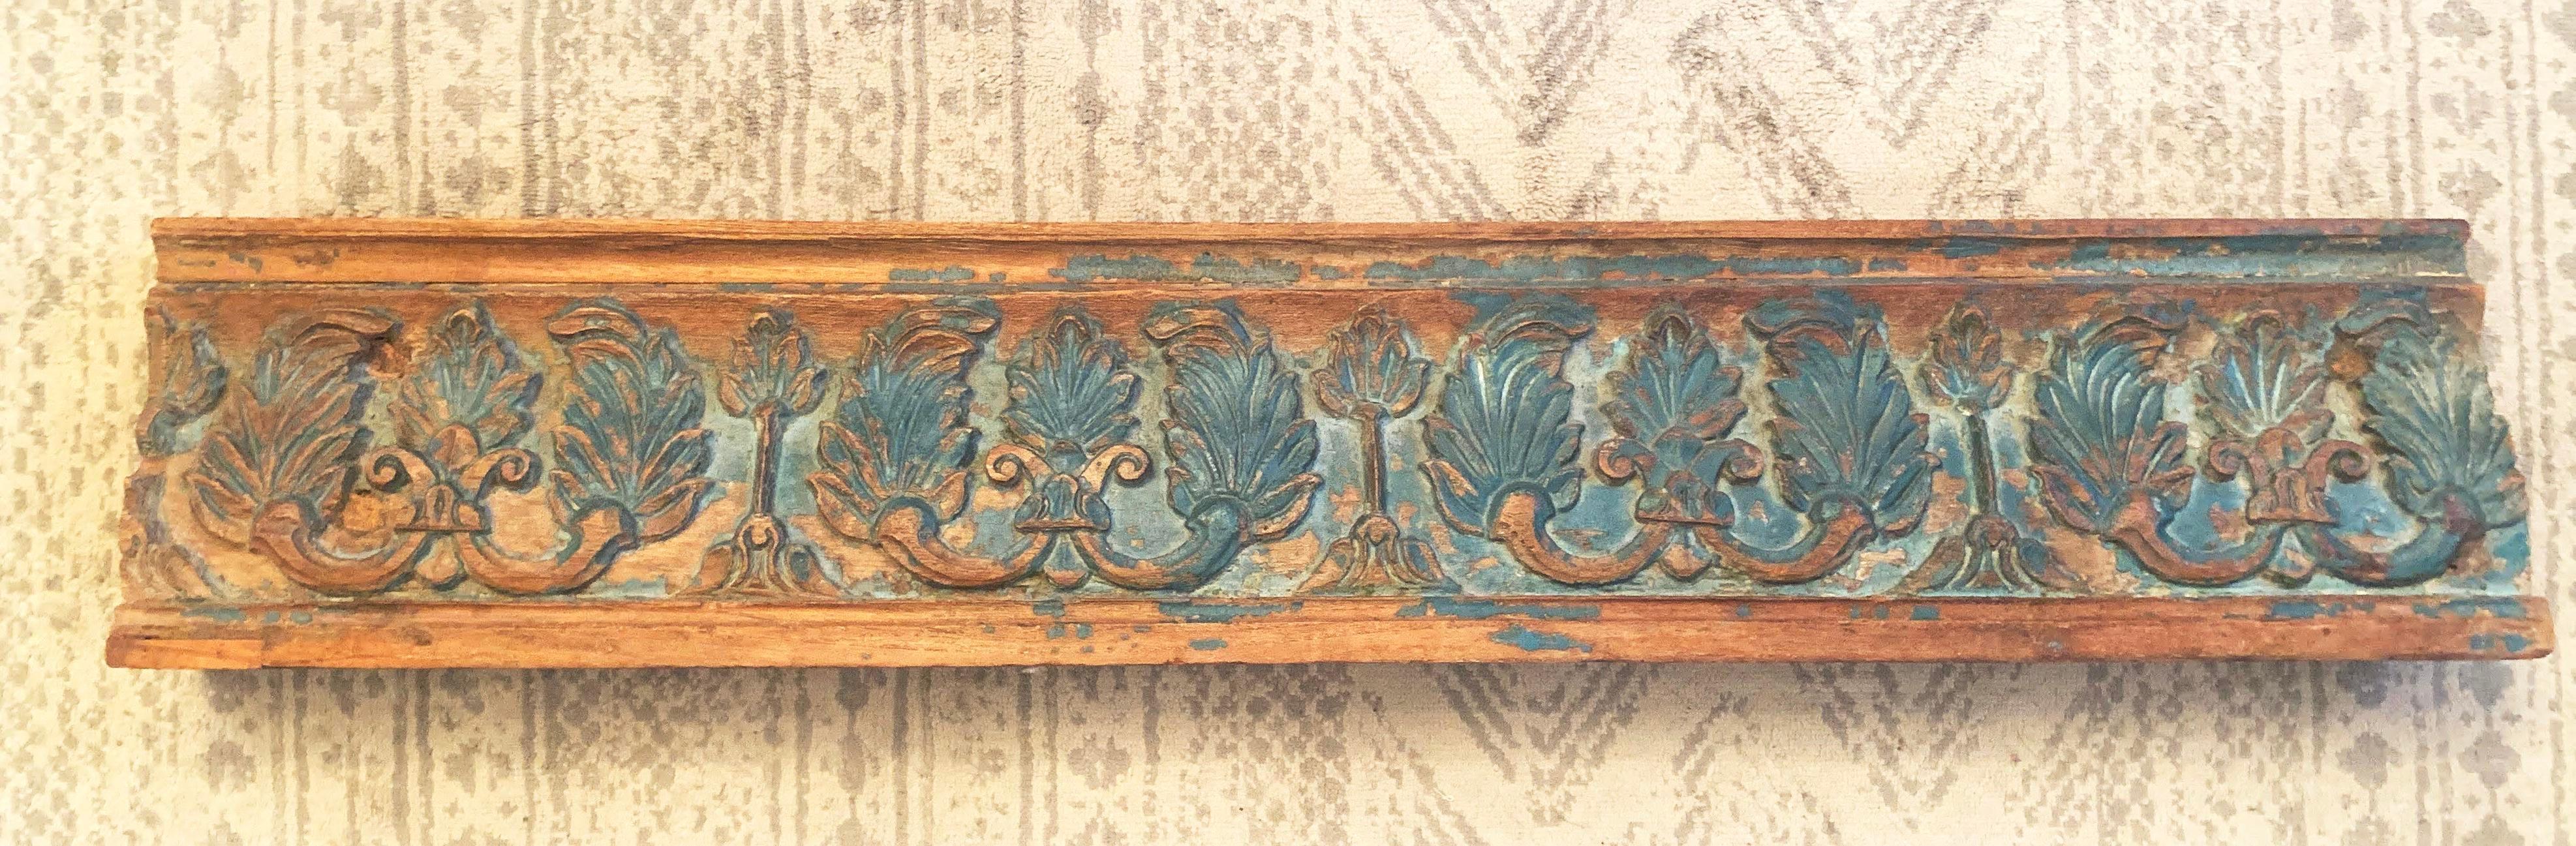 Antique Indian rosewood temple door beam carving with green distressed paint, circa 1900. Made of solid rosewood. Thick green paint has faded and chipped in many areas, revealing the carvings and rich colored rosewood below. Repeated scrolling